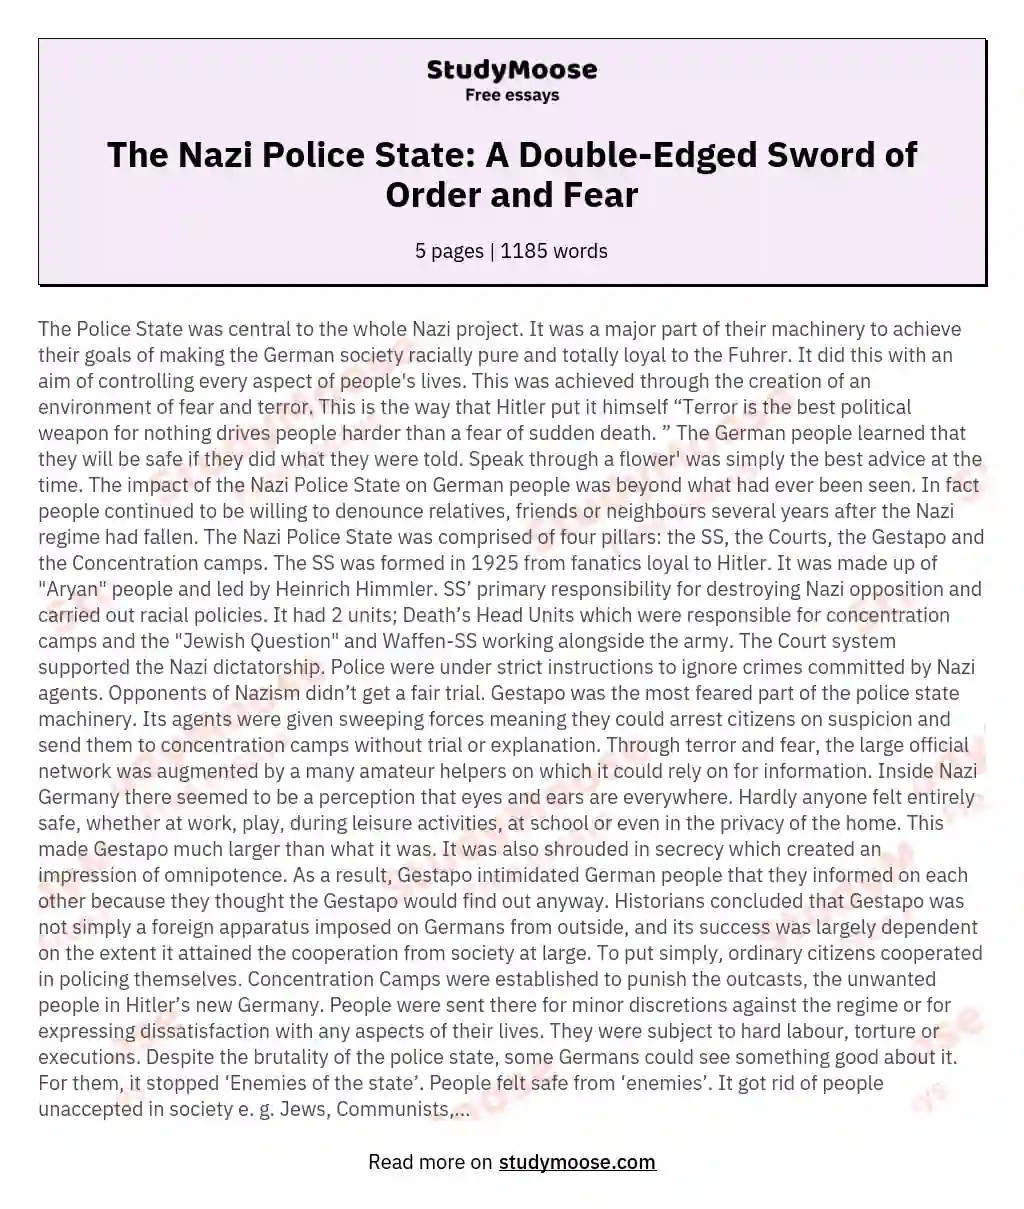 The Nazi Police State: A Double-Edged Sword of Order and Fear essay